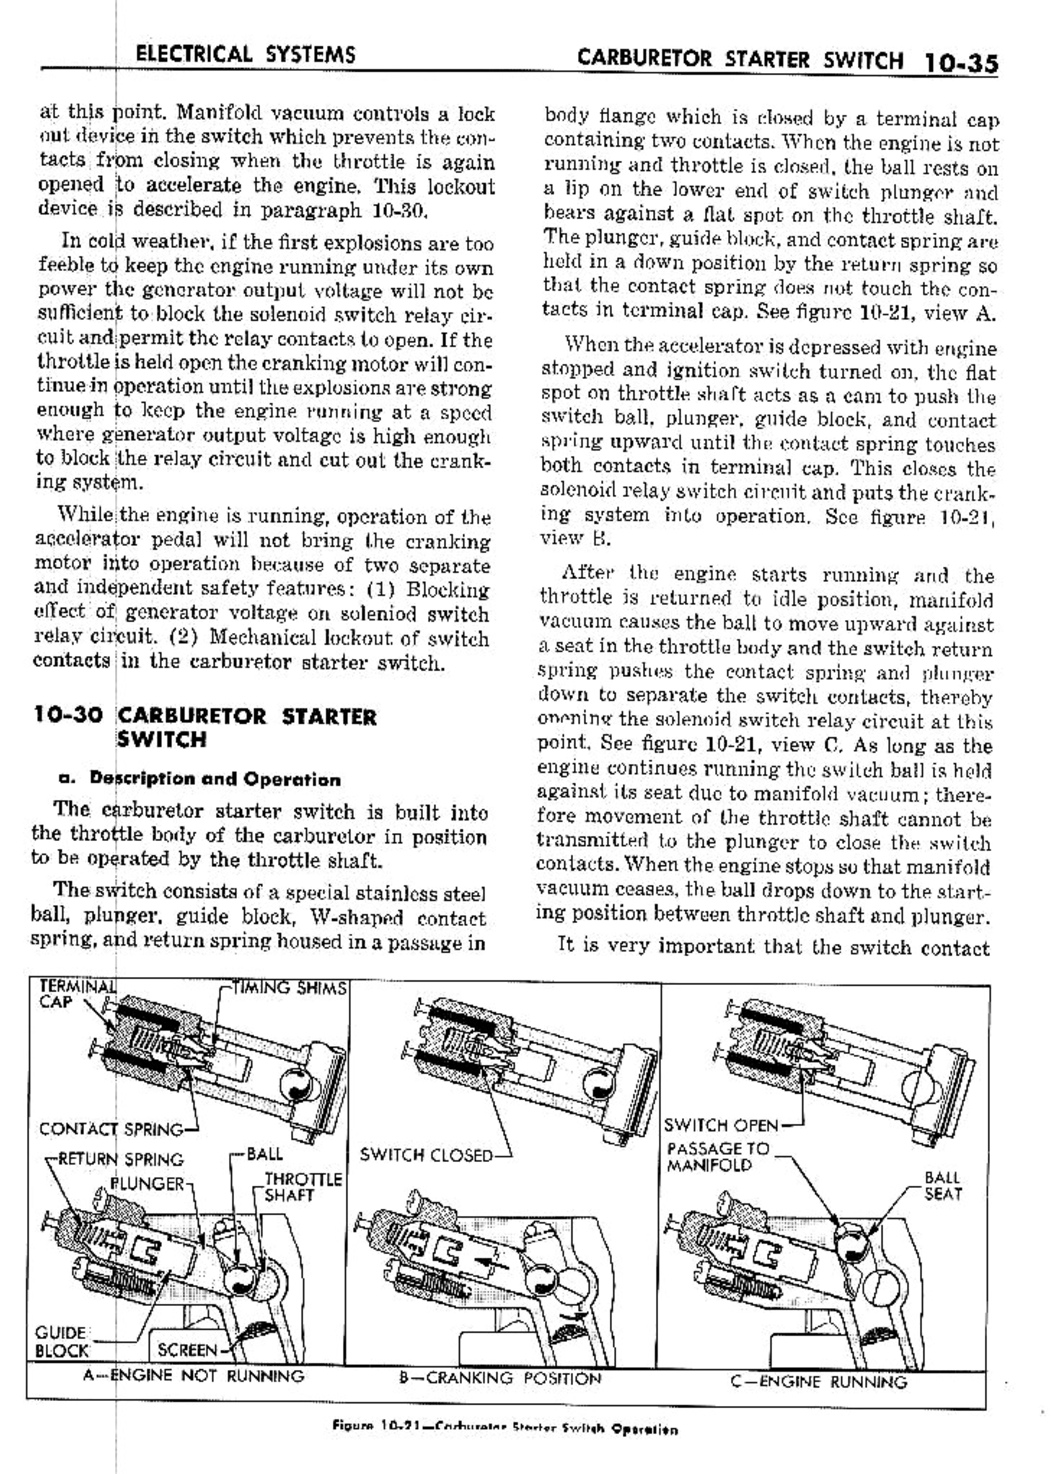 n_11 1959 Buick Shop Manual - Electrical Systems-035-035.jpg